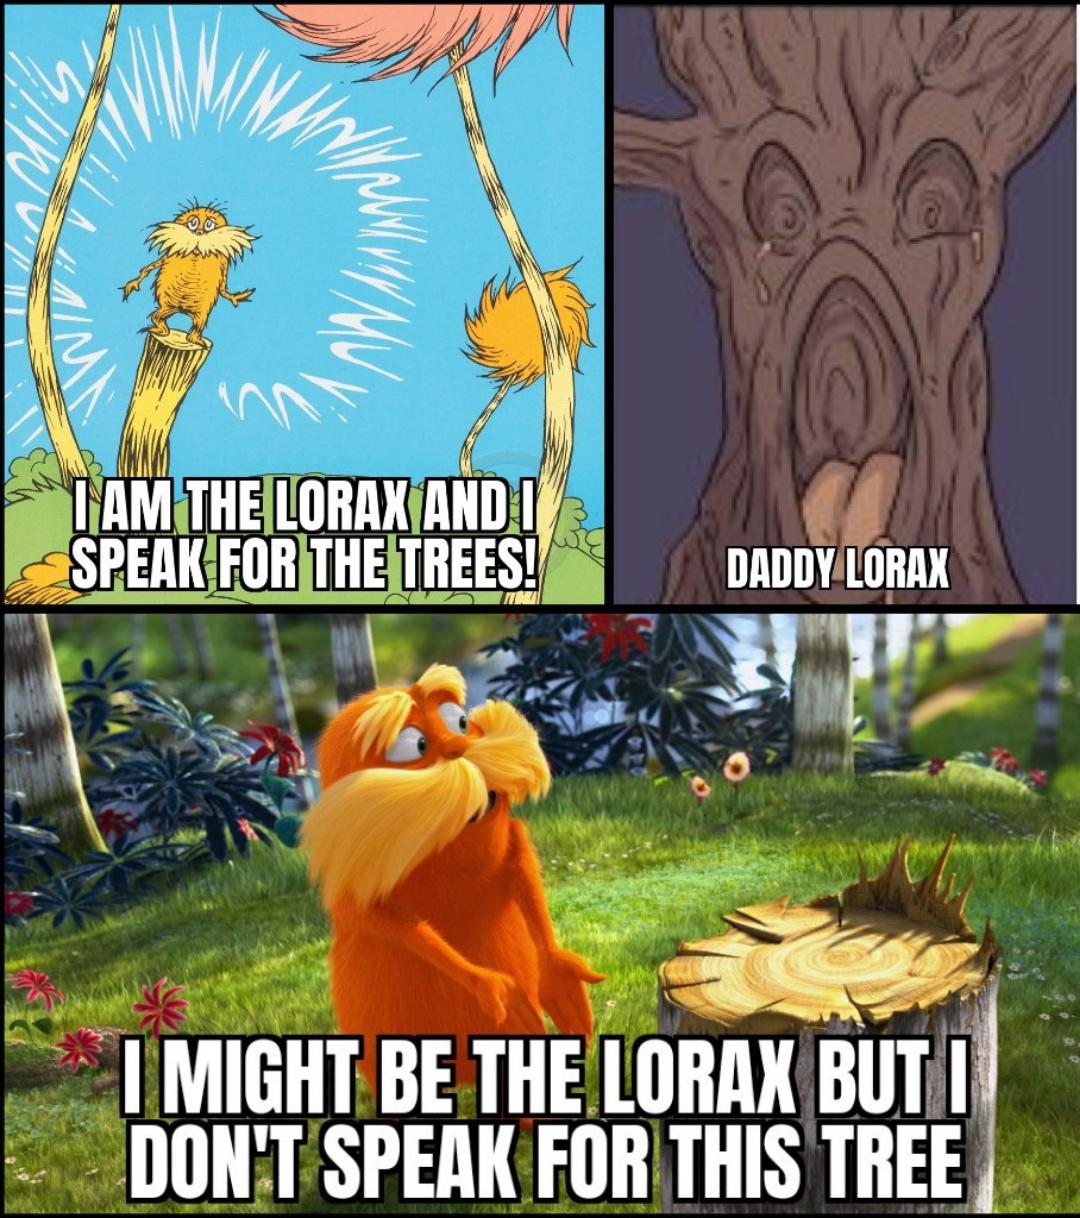 dank memes - funny memes - lorax movie - I Am The Lorax And I Speak For The Trees! Daddy Lorax I Might Be The Lorax But I Don'T Speak For This Tree